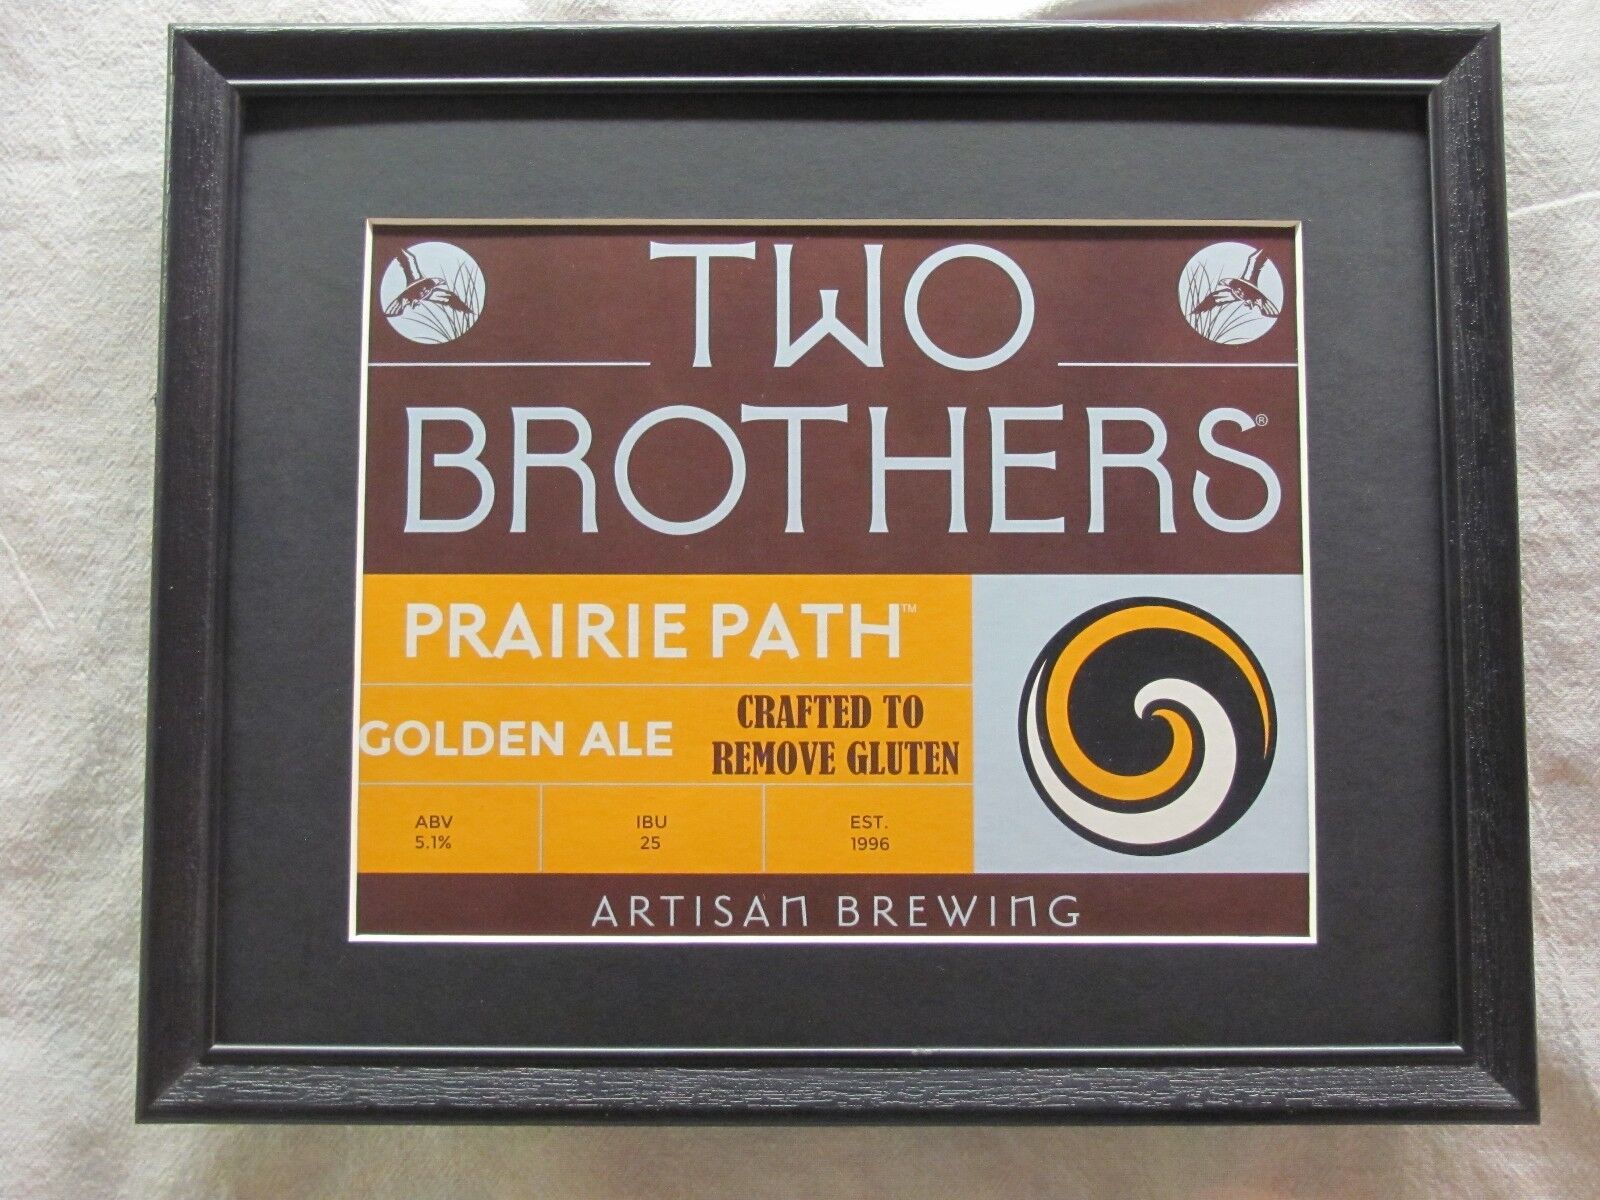 TWO BROTHERS PRAIRIE PATH   BEER SIGN   #1257